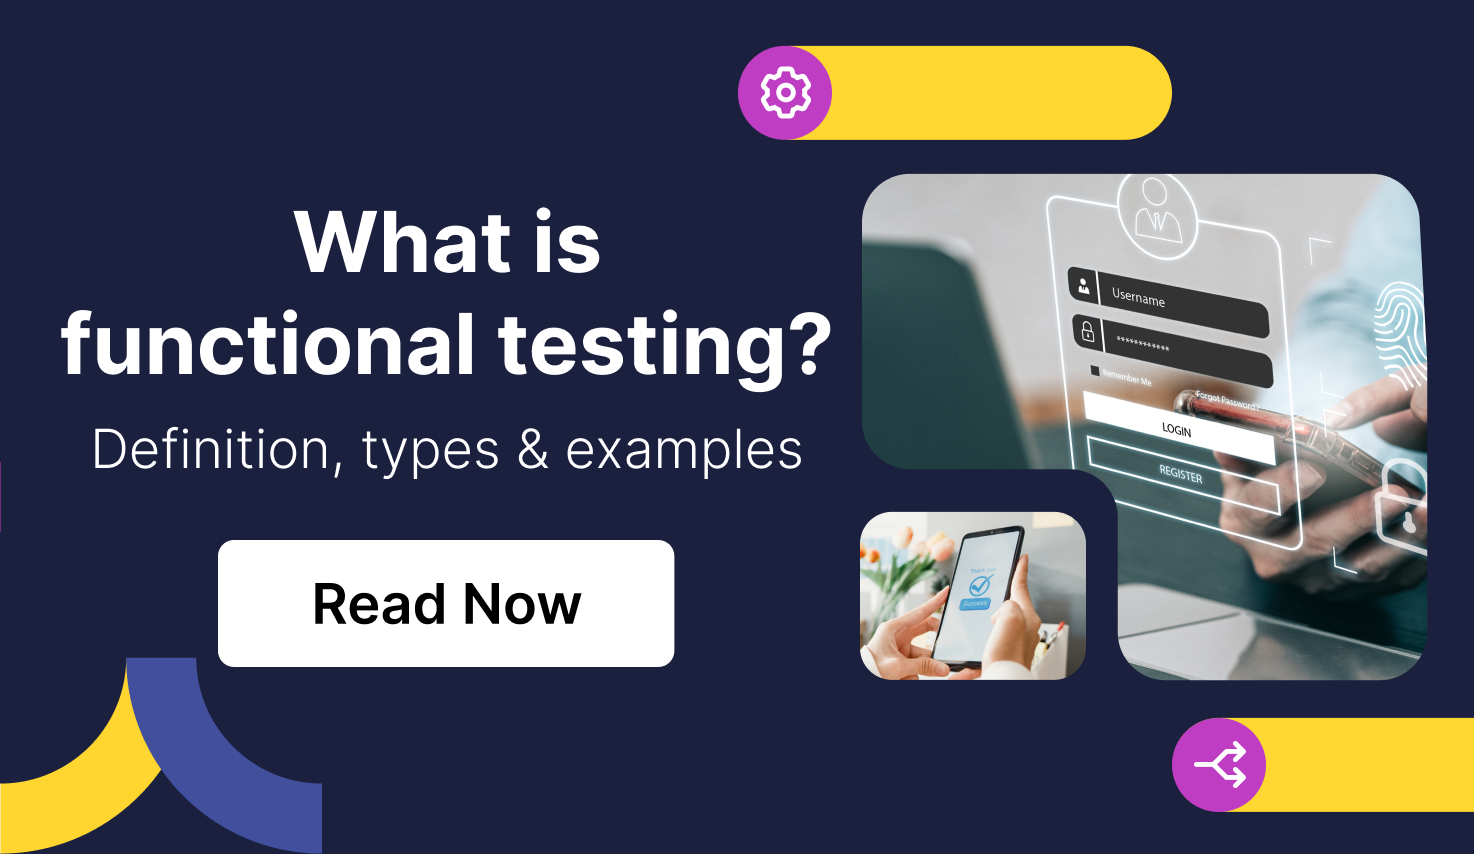 What is functional testing? Definition, types & examples